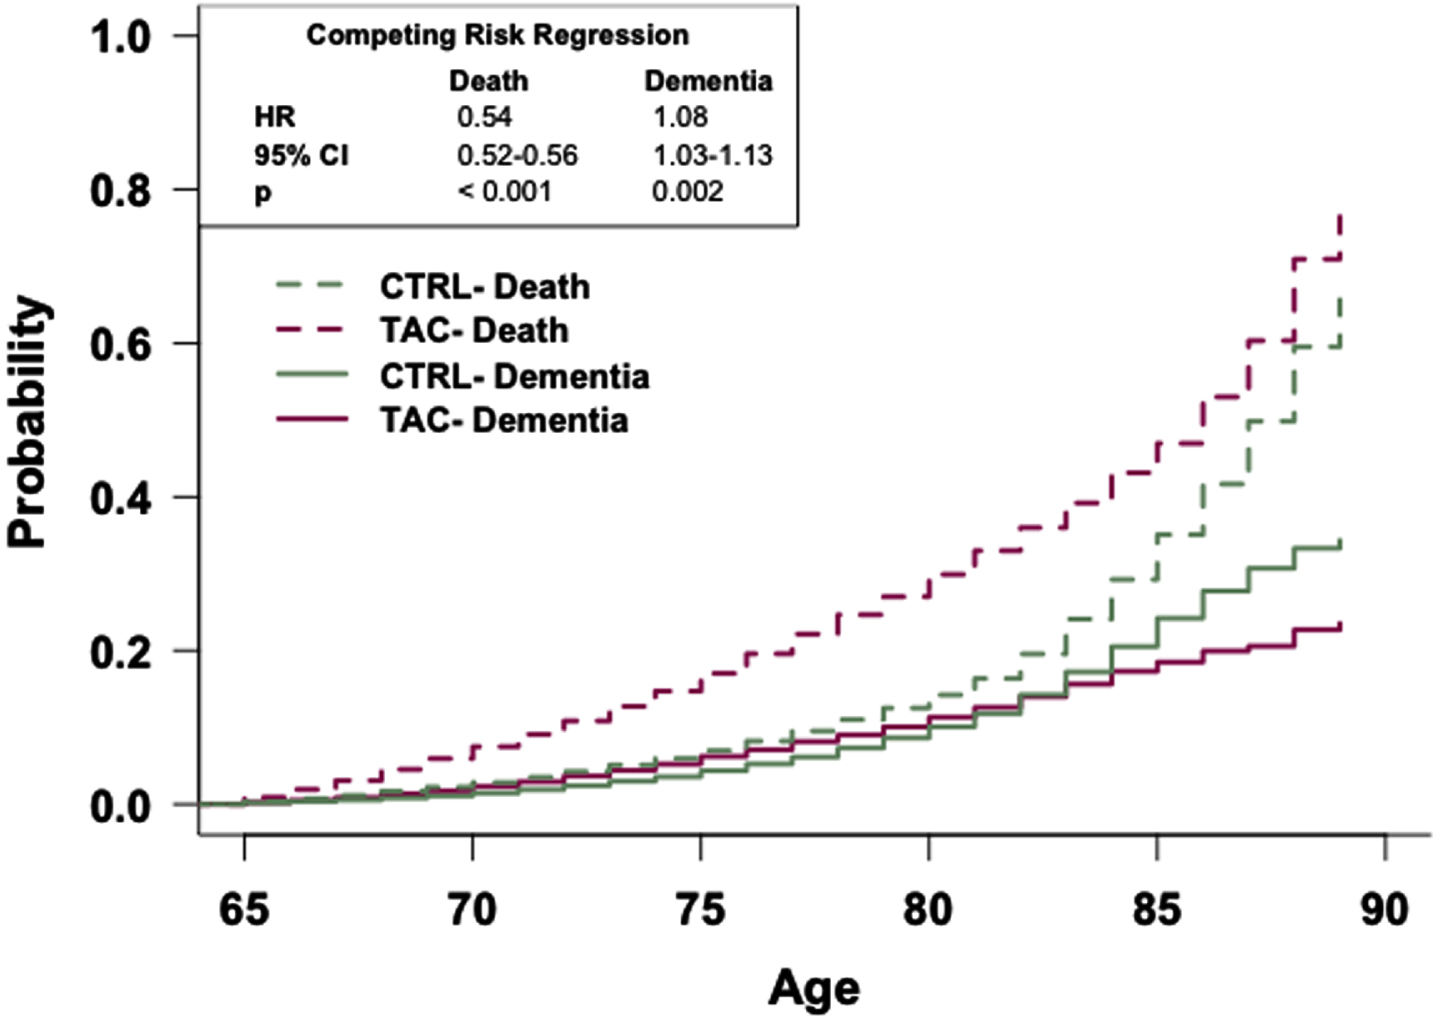 The general population has an increased risk of dementia relative to patients prescribed tacrolimus. Competing risk regression analysis of dementia and death between patients prescribed tacrolimus or in the general population-like control. Patients in the general population-like control have an increased risk of dementia but a decreased risk of death. n = 48,081 patients/cohort. CRR, competing risk regression; HR, hazard ratio; CI, confidence interval.